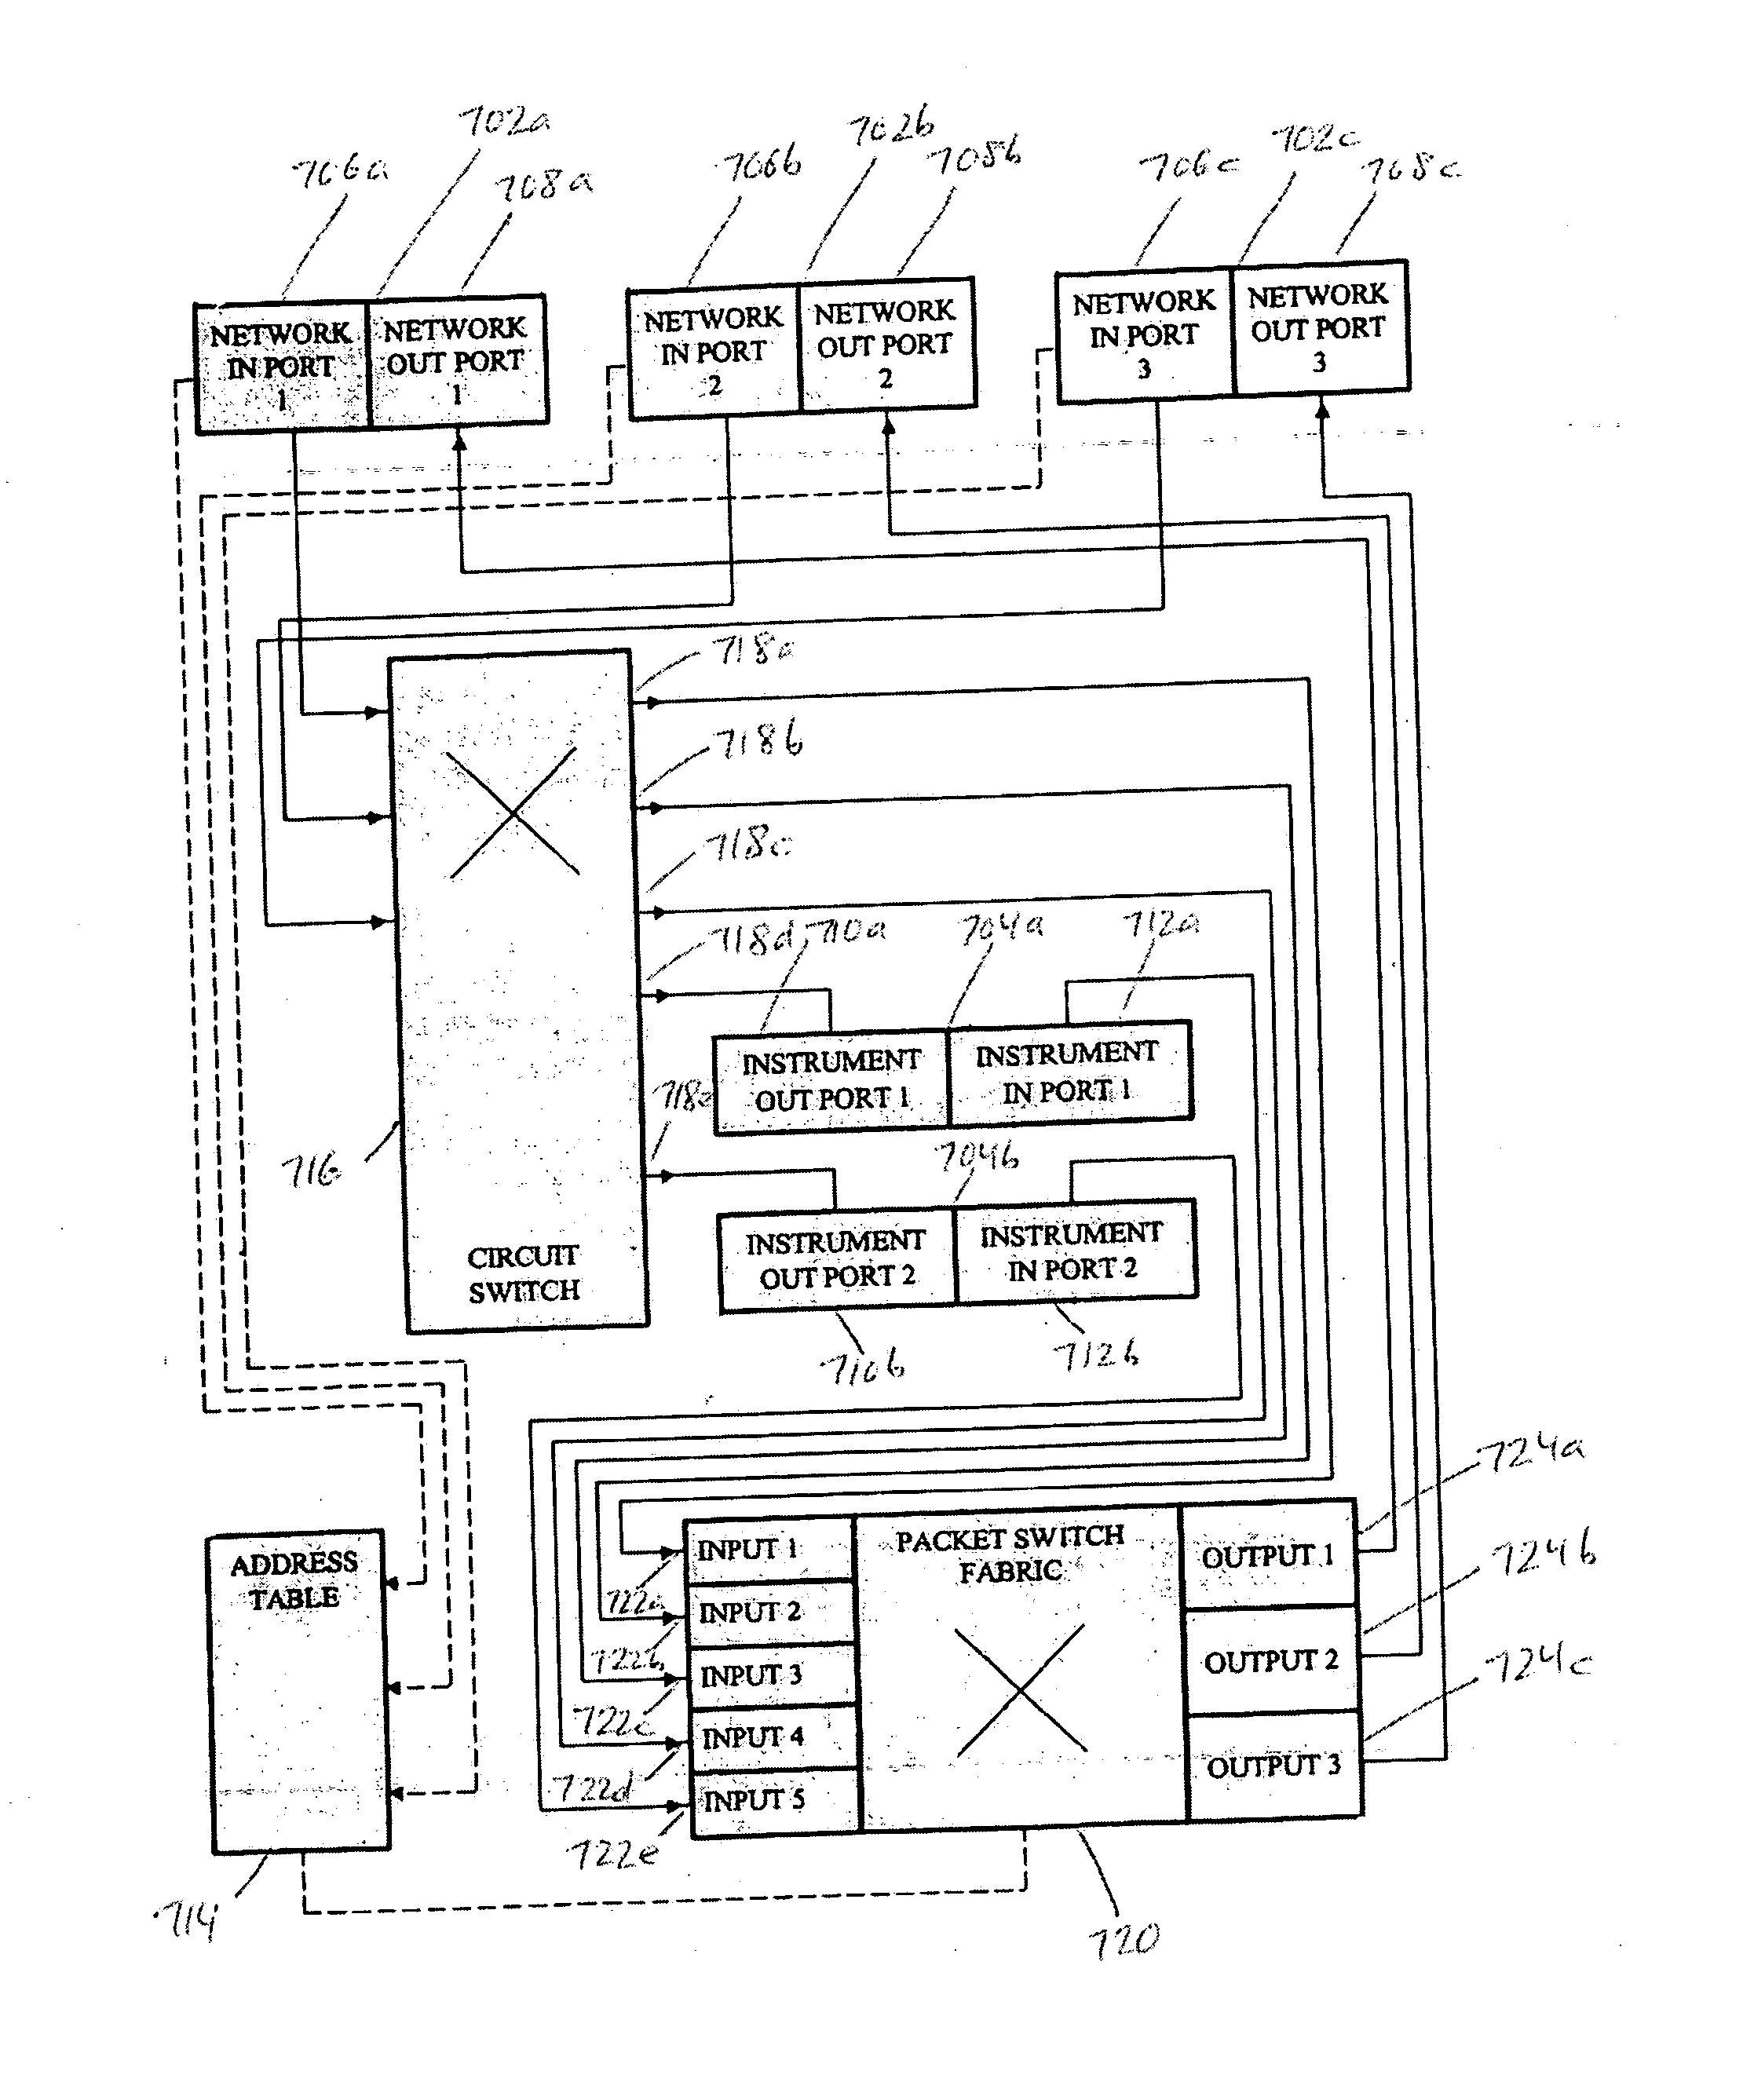 Asymmetric packet switch and a method of use